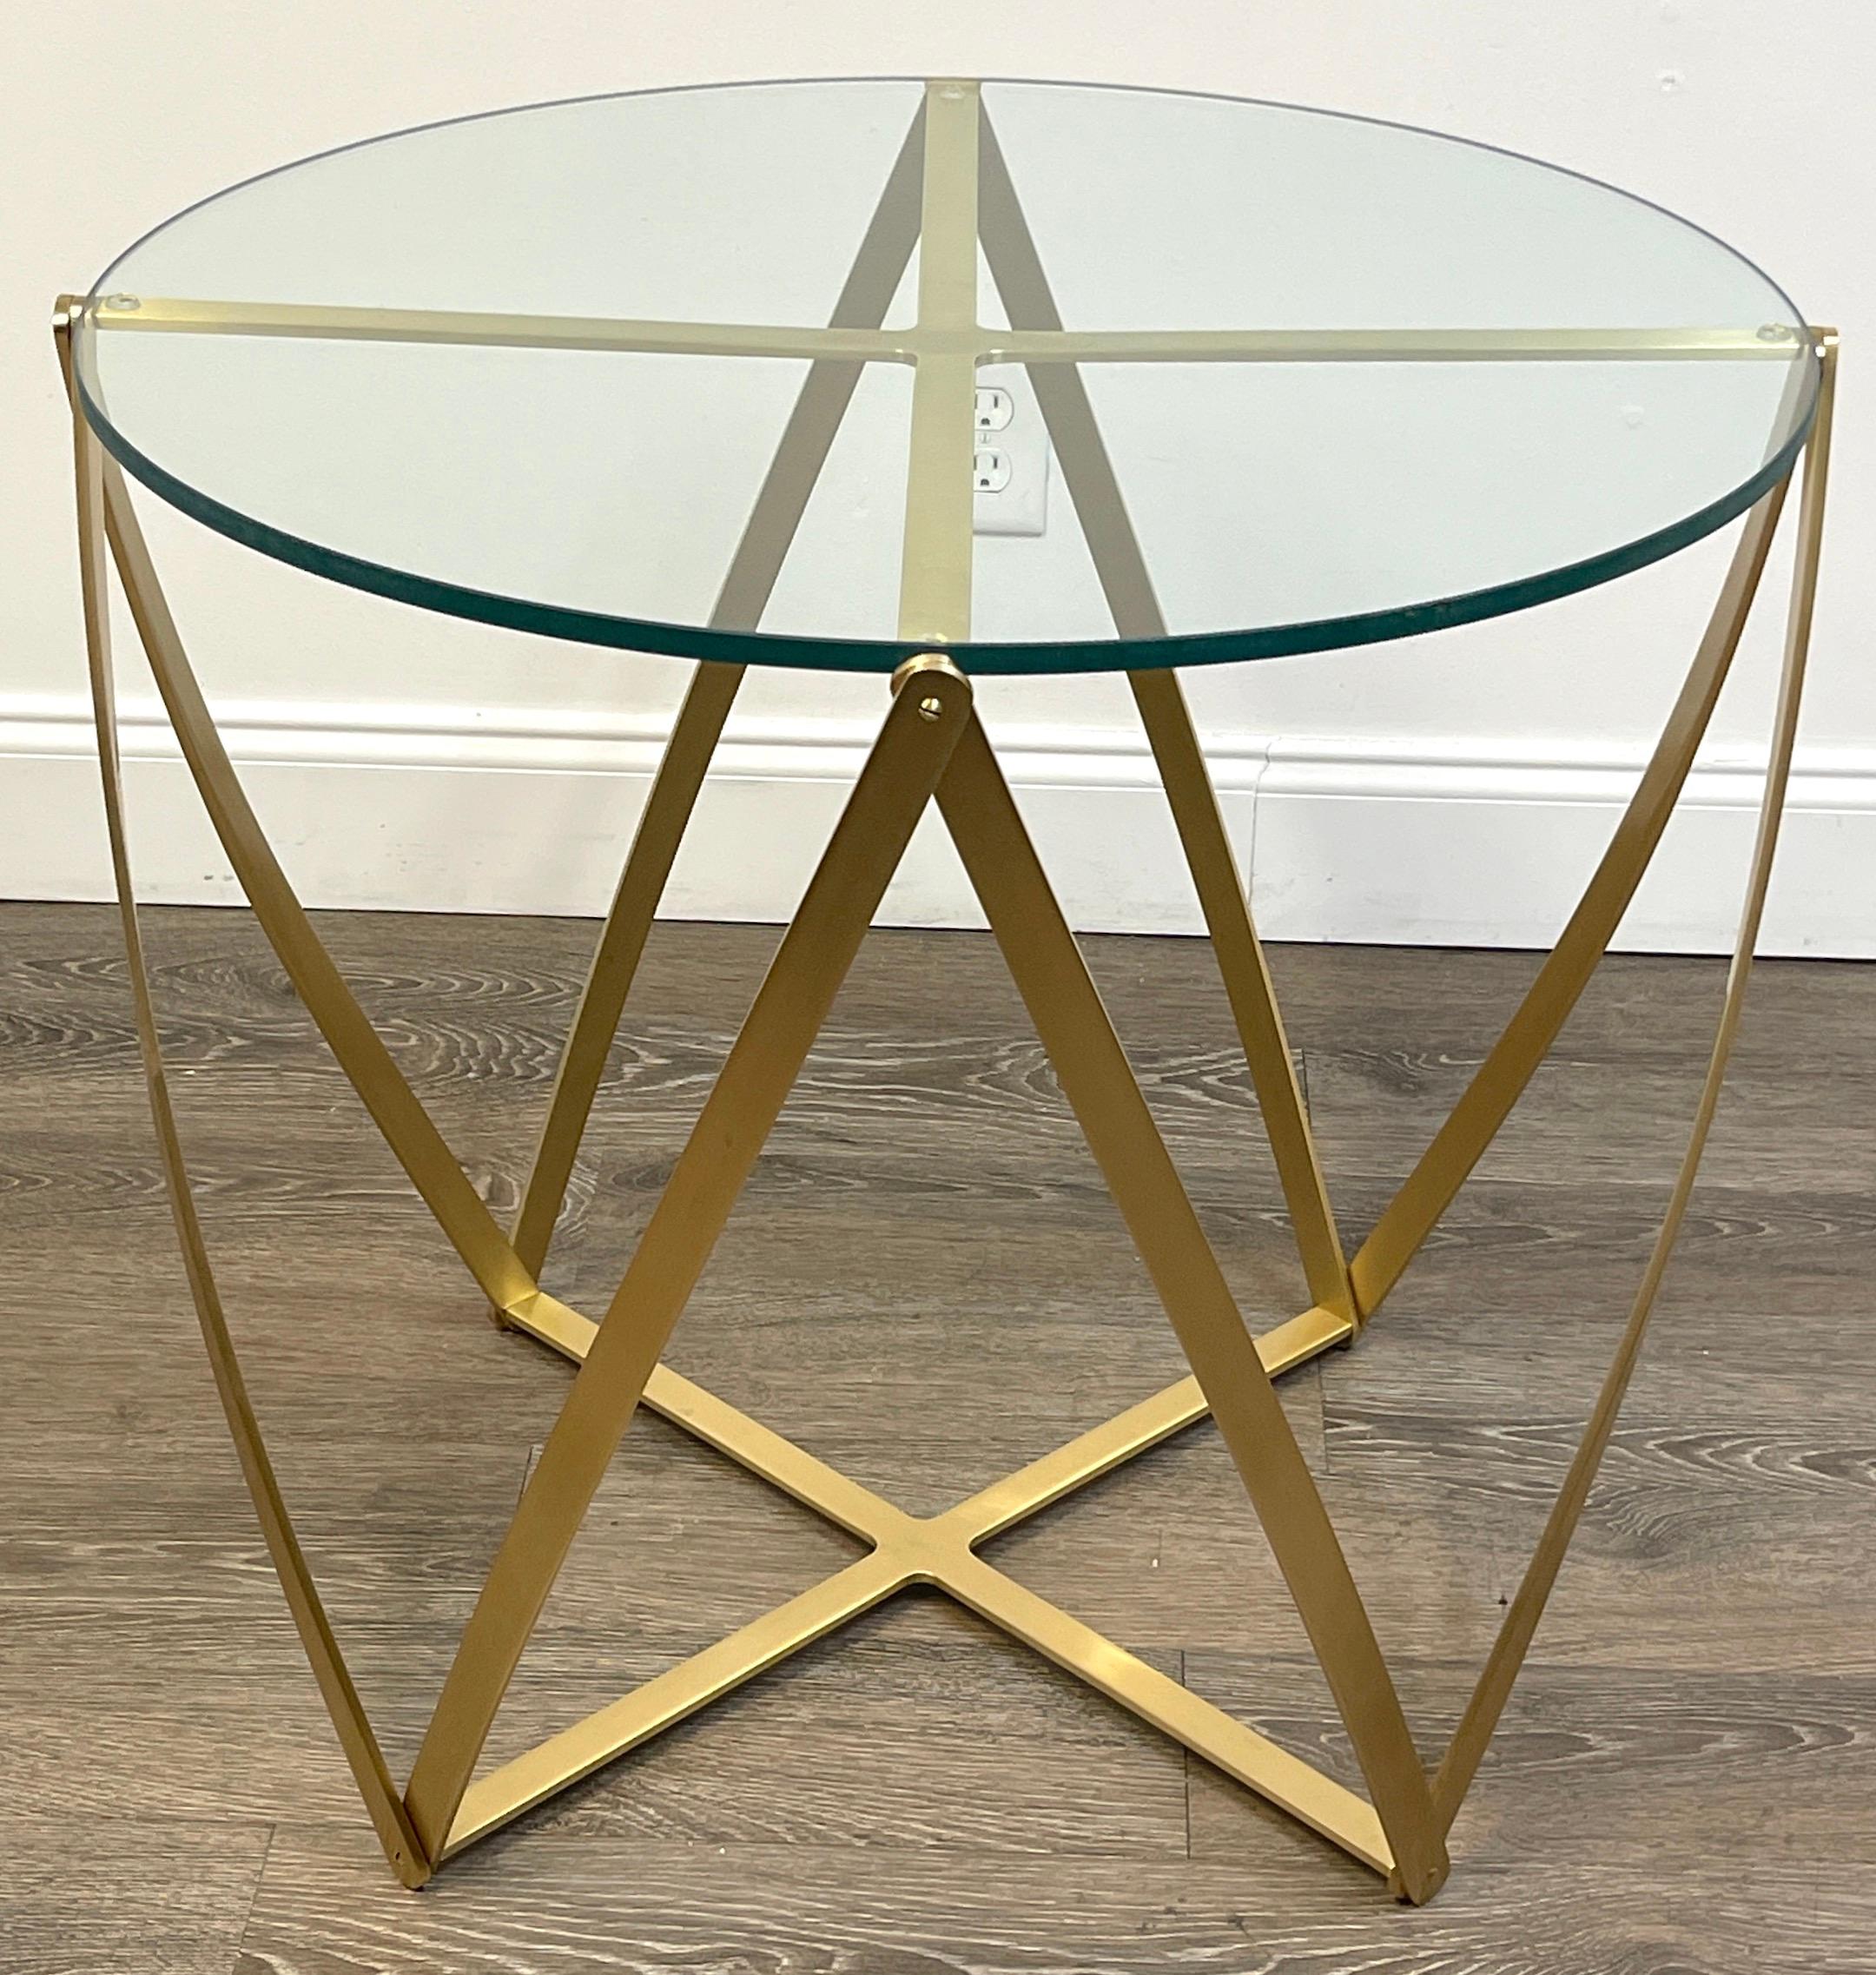 John Vesey brass geometric table.
USA, Circa 1960s.
A fine and large example, of his iconic 'spool' table. Precision craftsmanship, with inset and removable glass top. 

